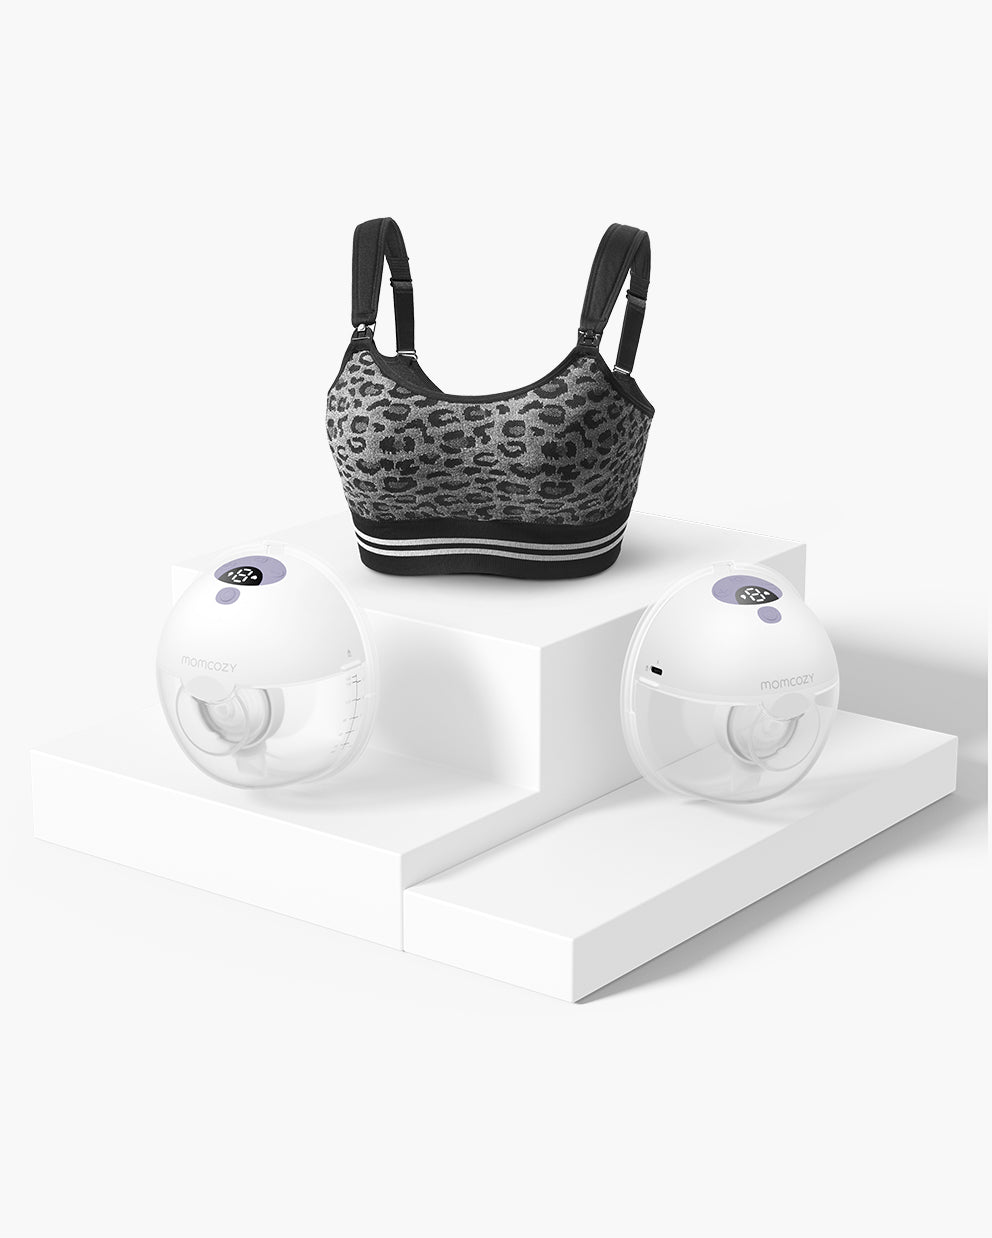 Momcozy M5 Hands-free Breast Pump: In-Depth Review